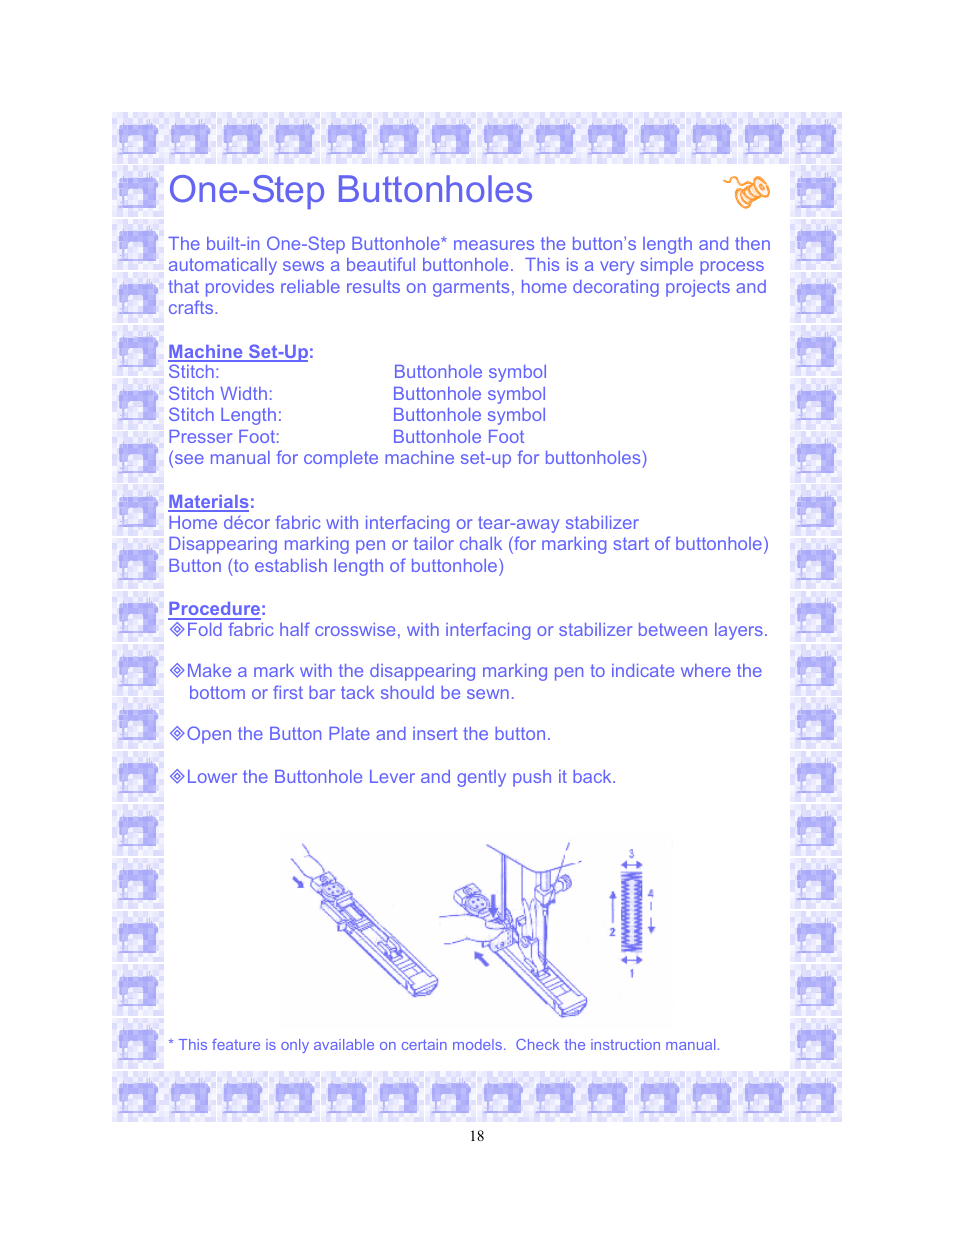 One-step buttonholes | SINGER 6550-WORKBOOK Scholastic User Manual | Page 22 / 59